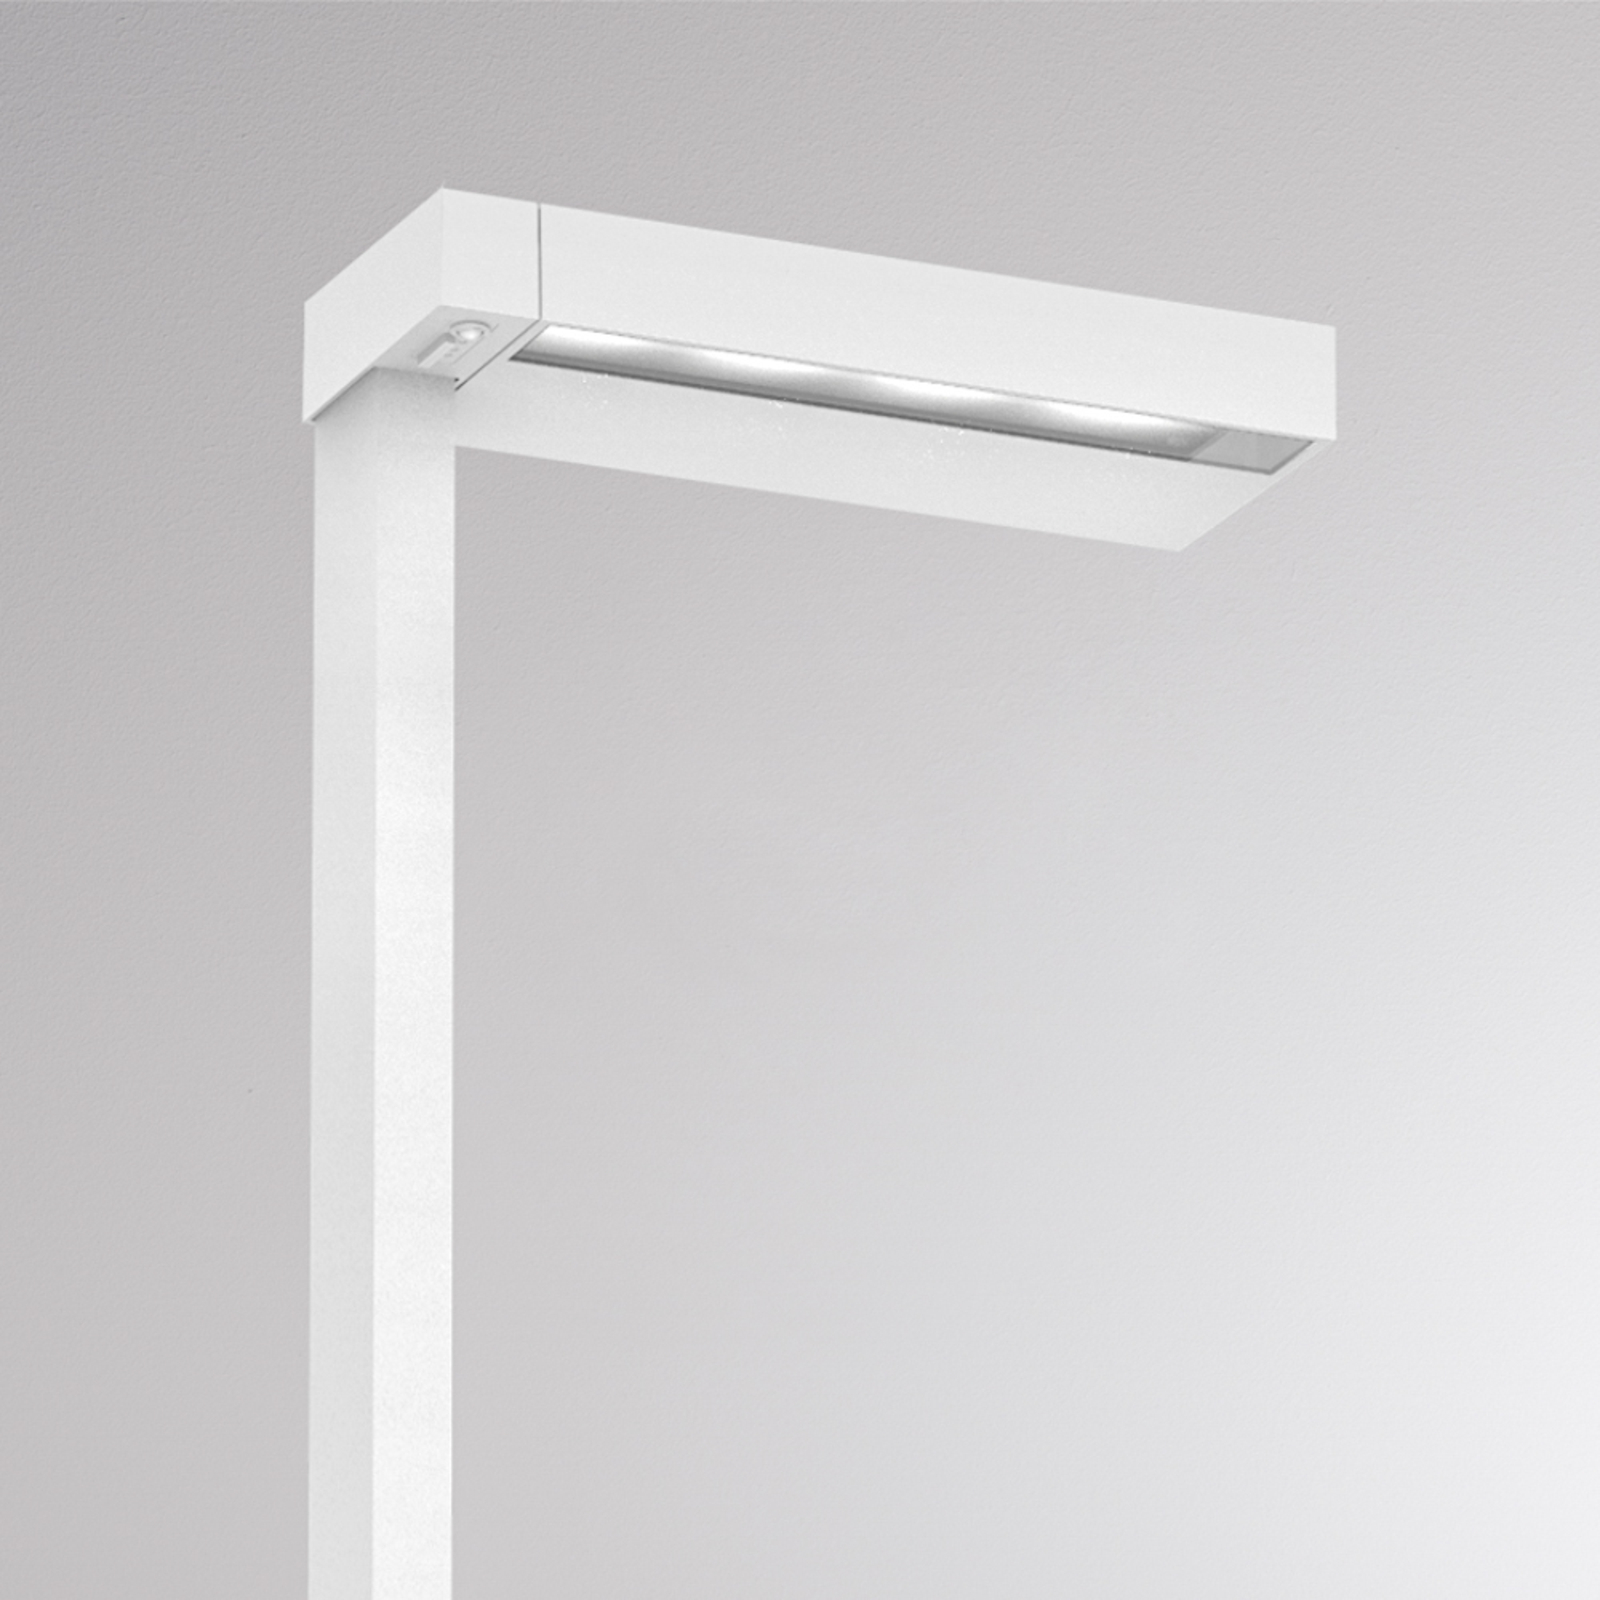 Molto Luce Concept Right F vloerlamp dimbaar wit